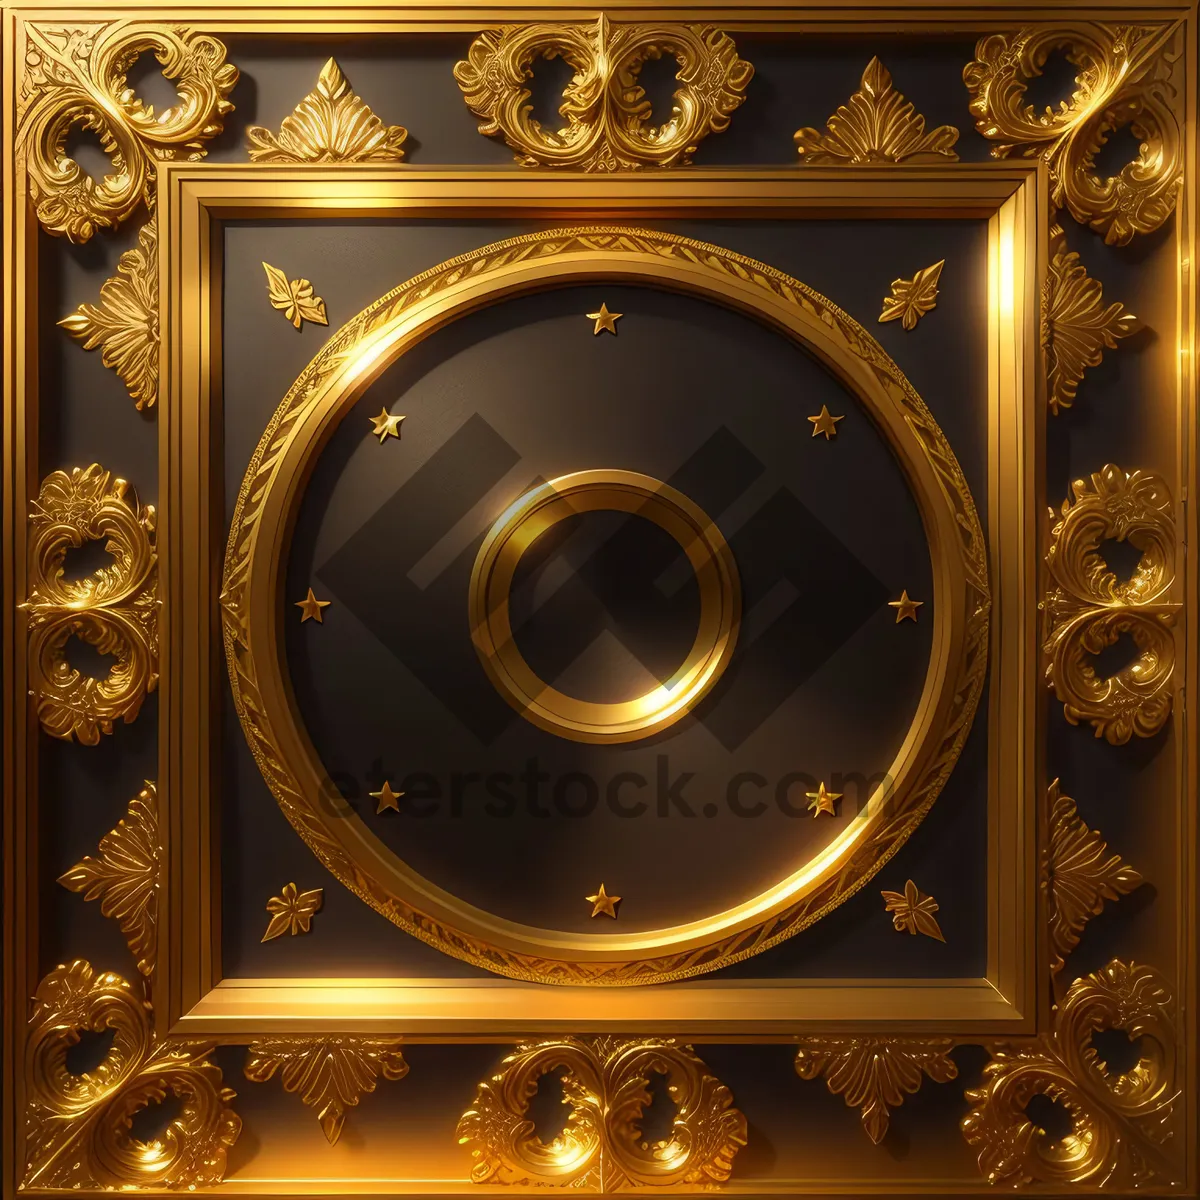 Picture of Golden Antique Gong Frame: Intricate Decorative Design